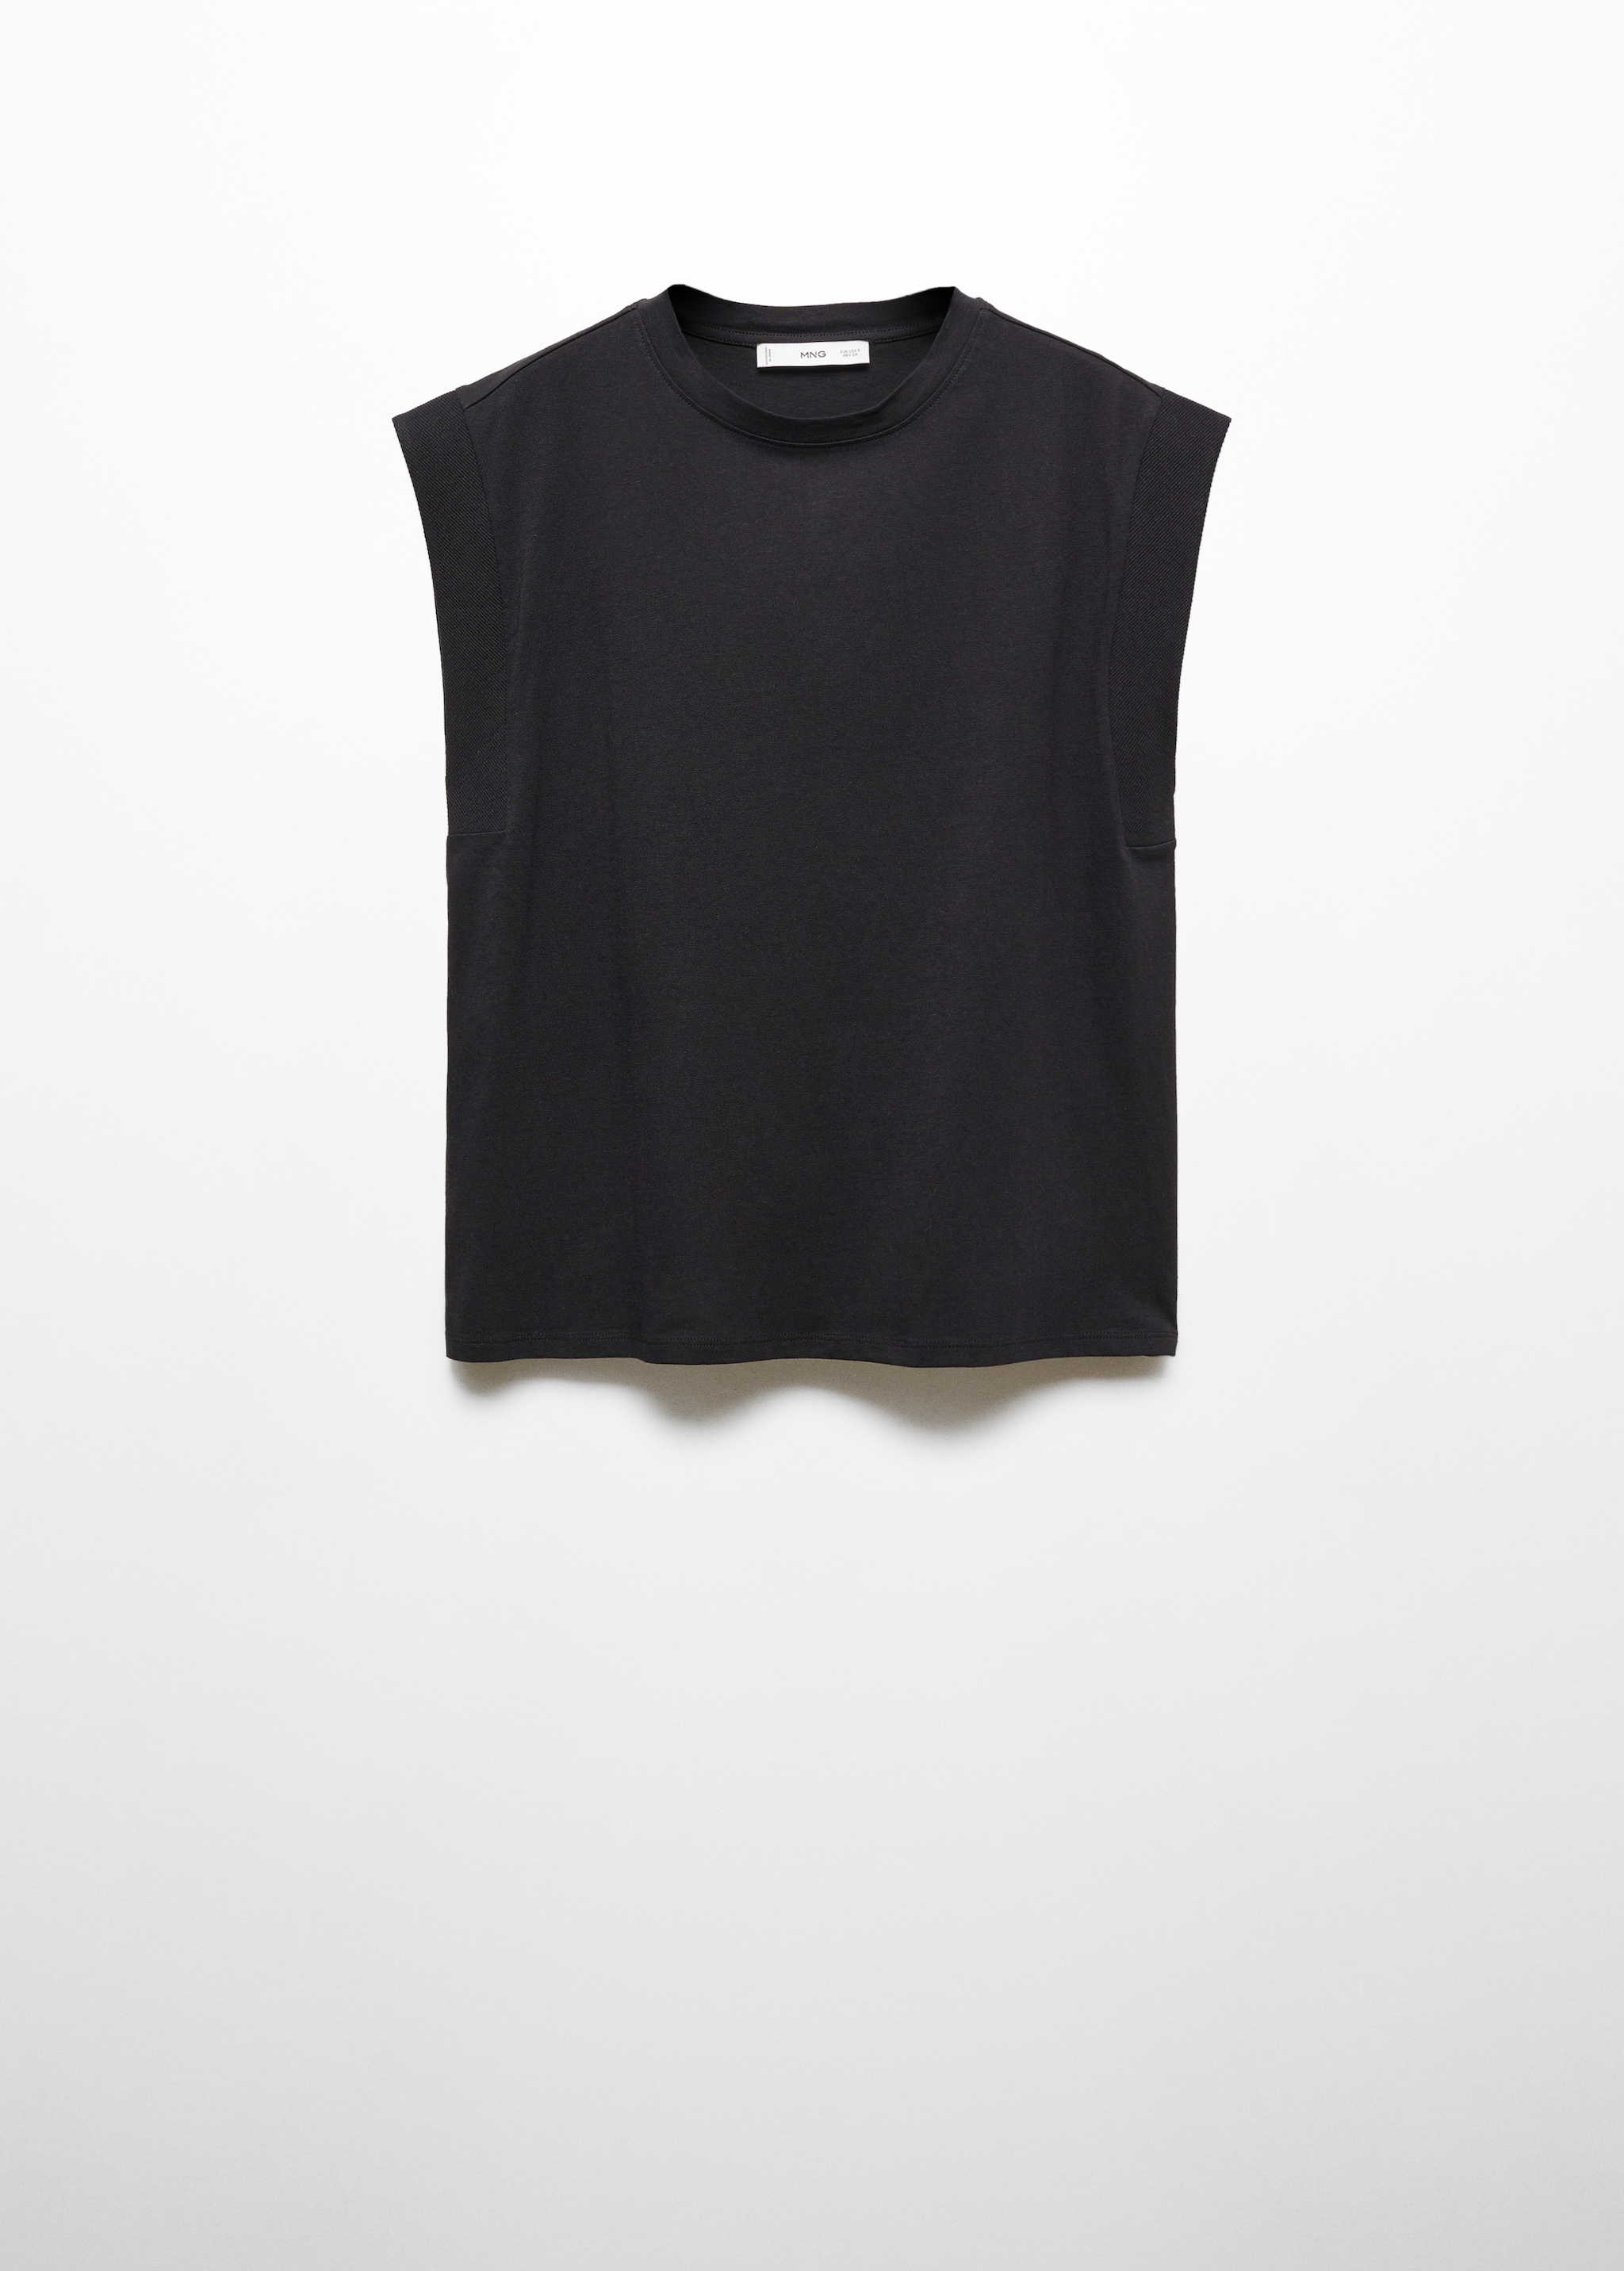 Rounded neck cotton t-shirt - Article without model